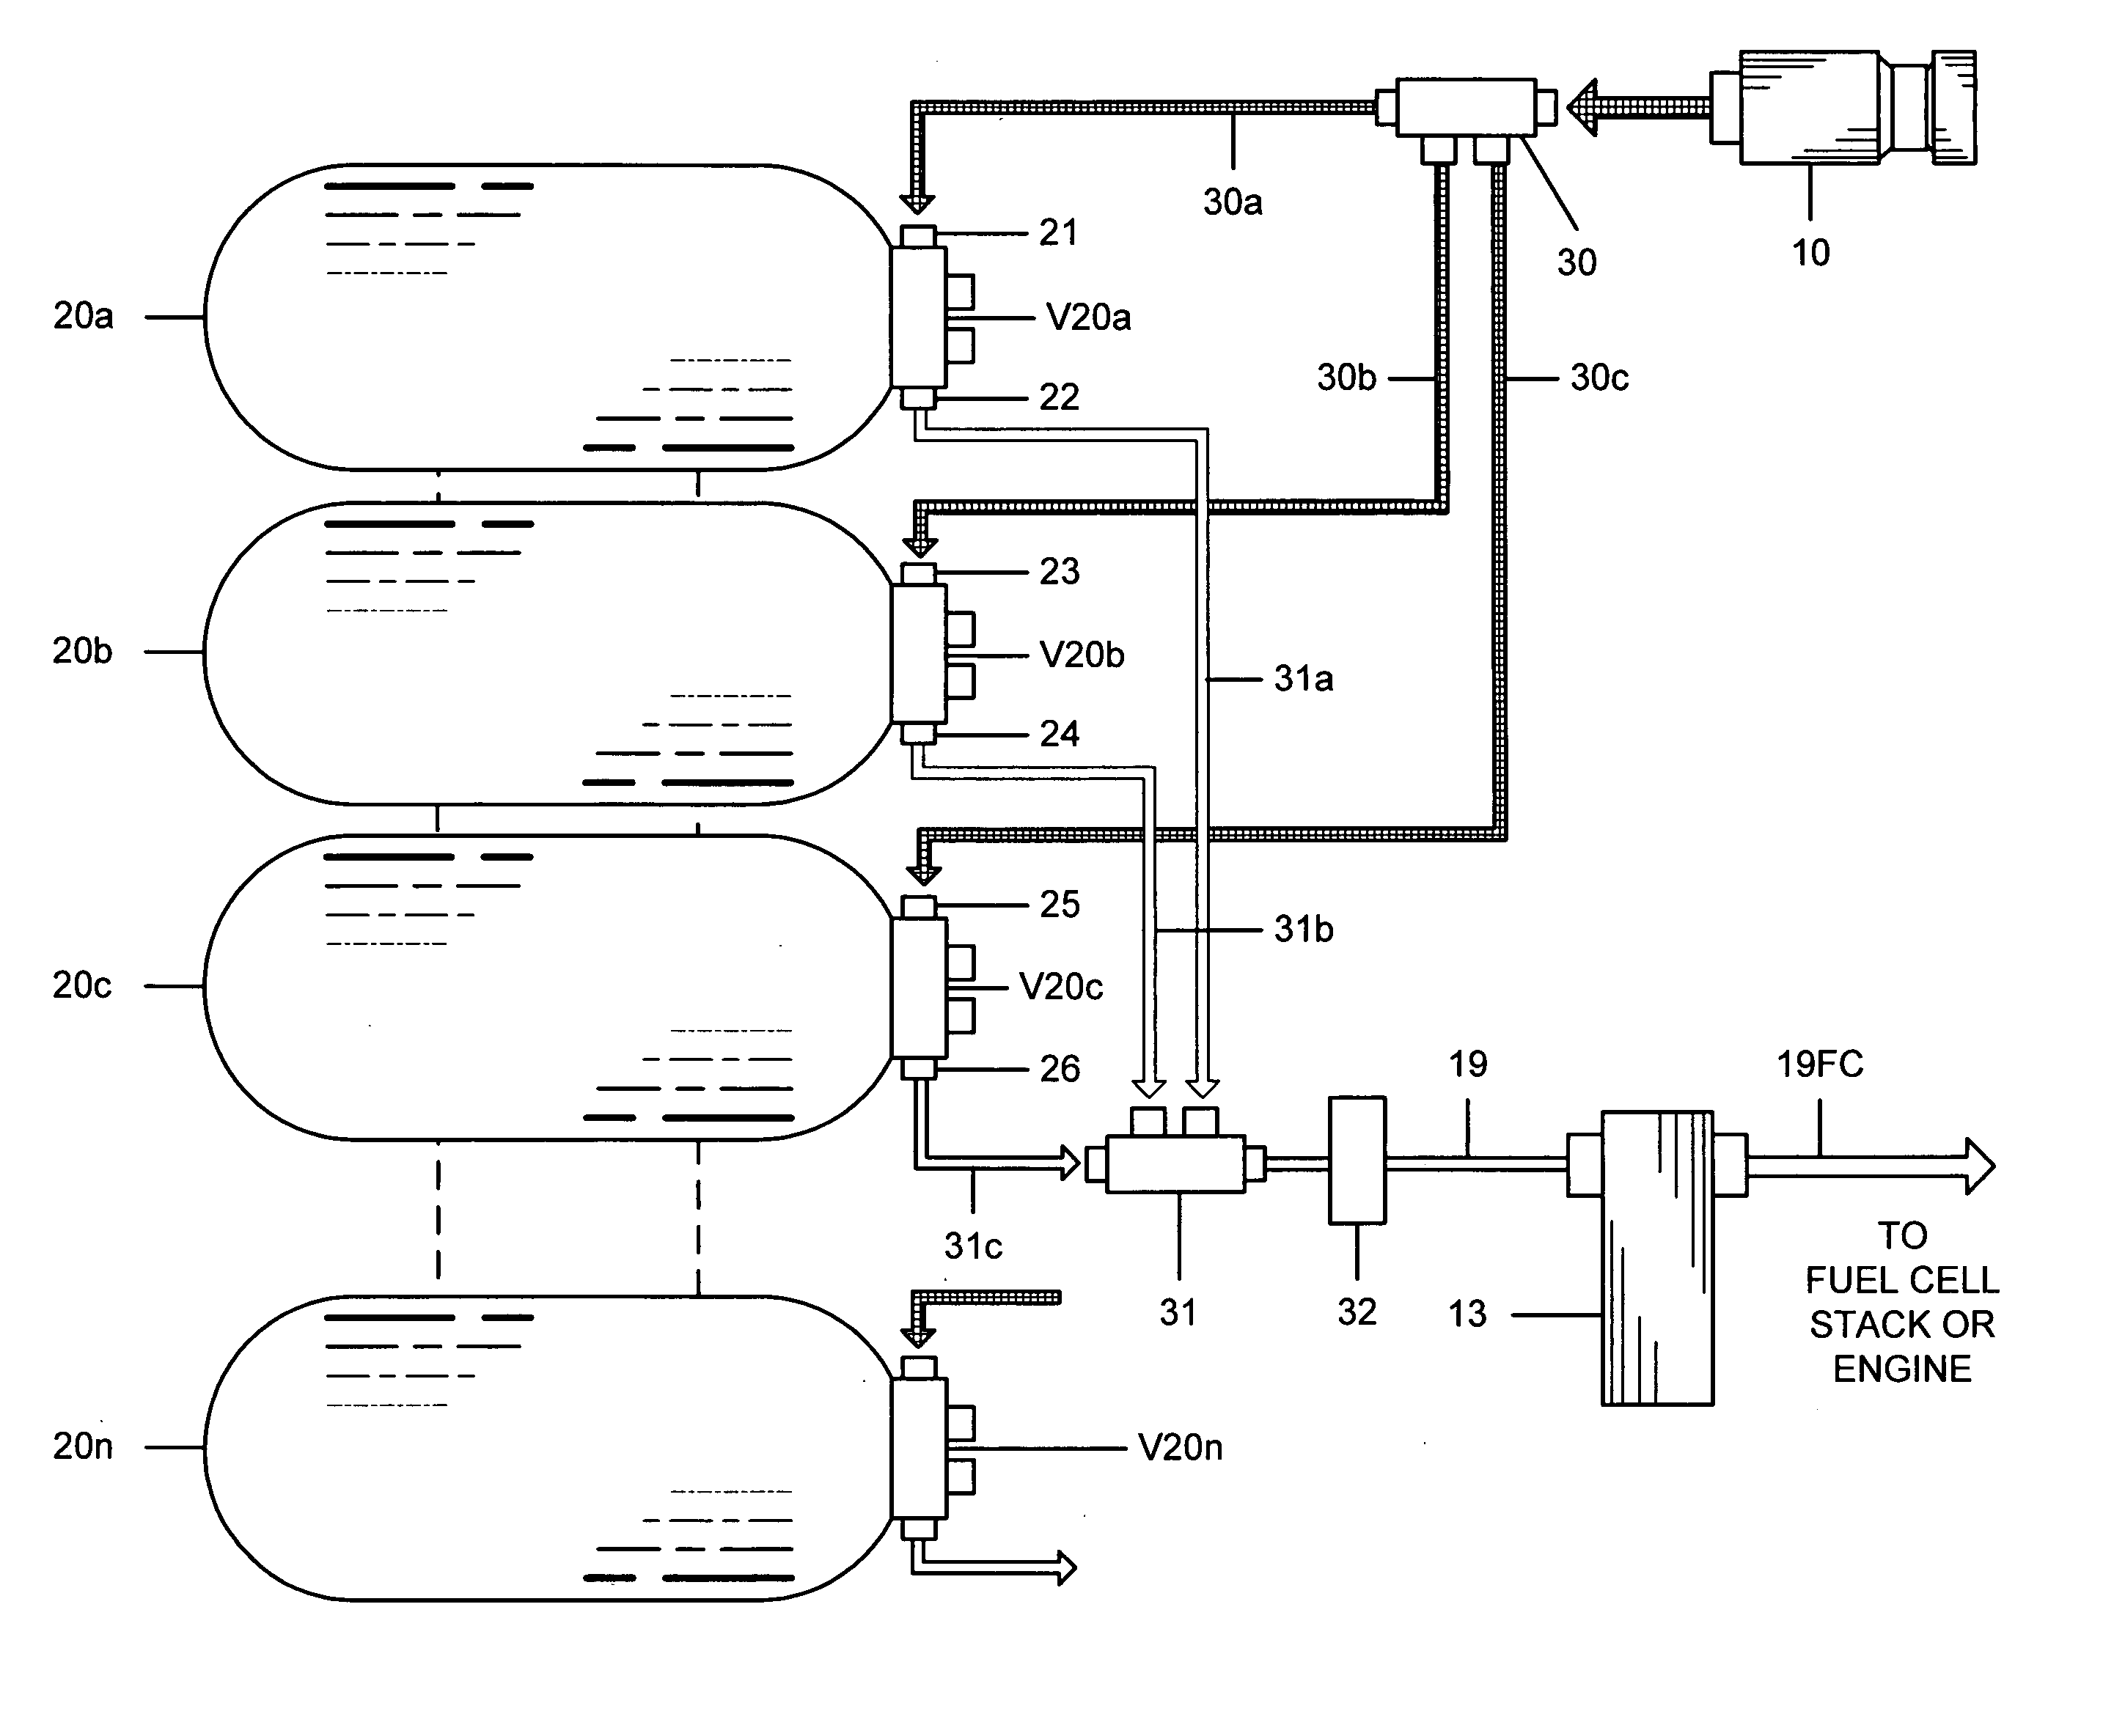 Hydrogen vehicle gas utilization and refueling system